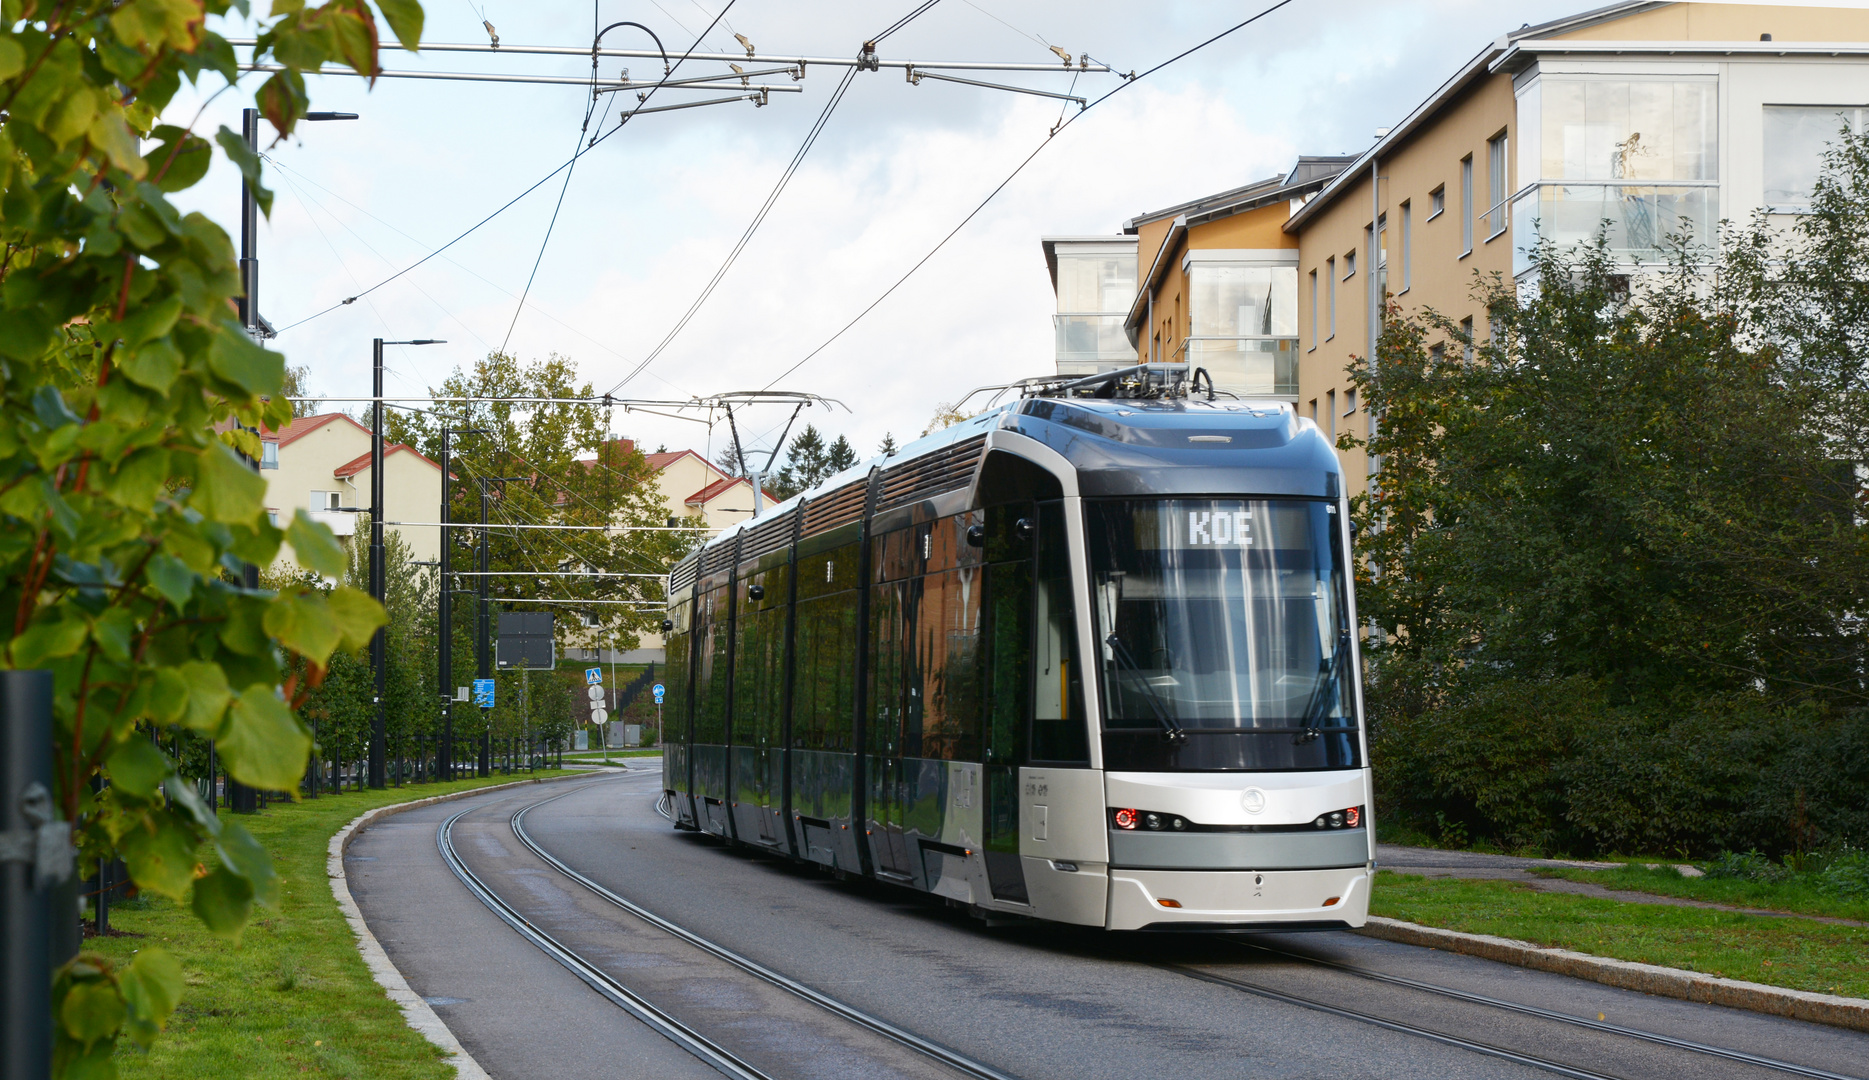 The new tramp line 15 start at 21.9.2023